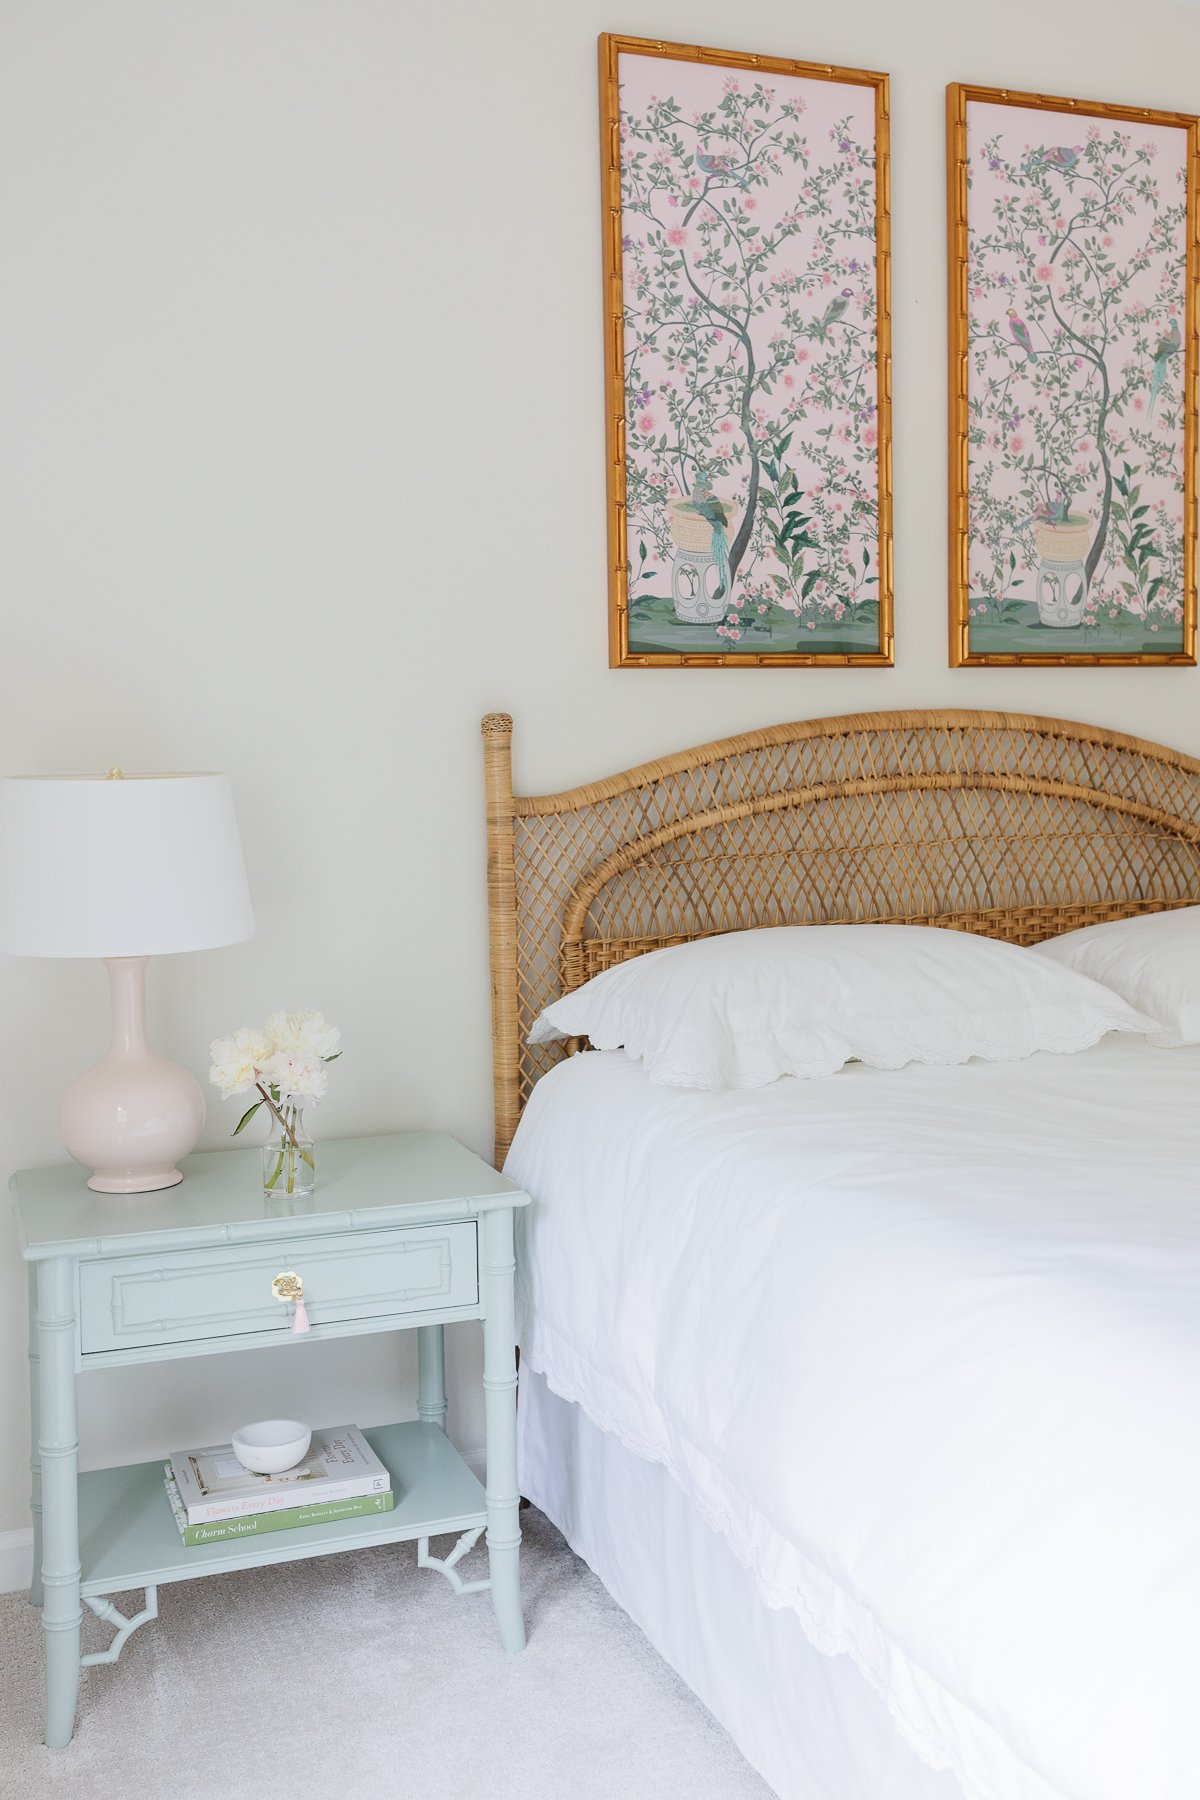 A guest bedroom with a rattan headboard and pink and green chinoiserie art above.